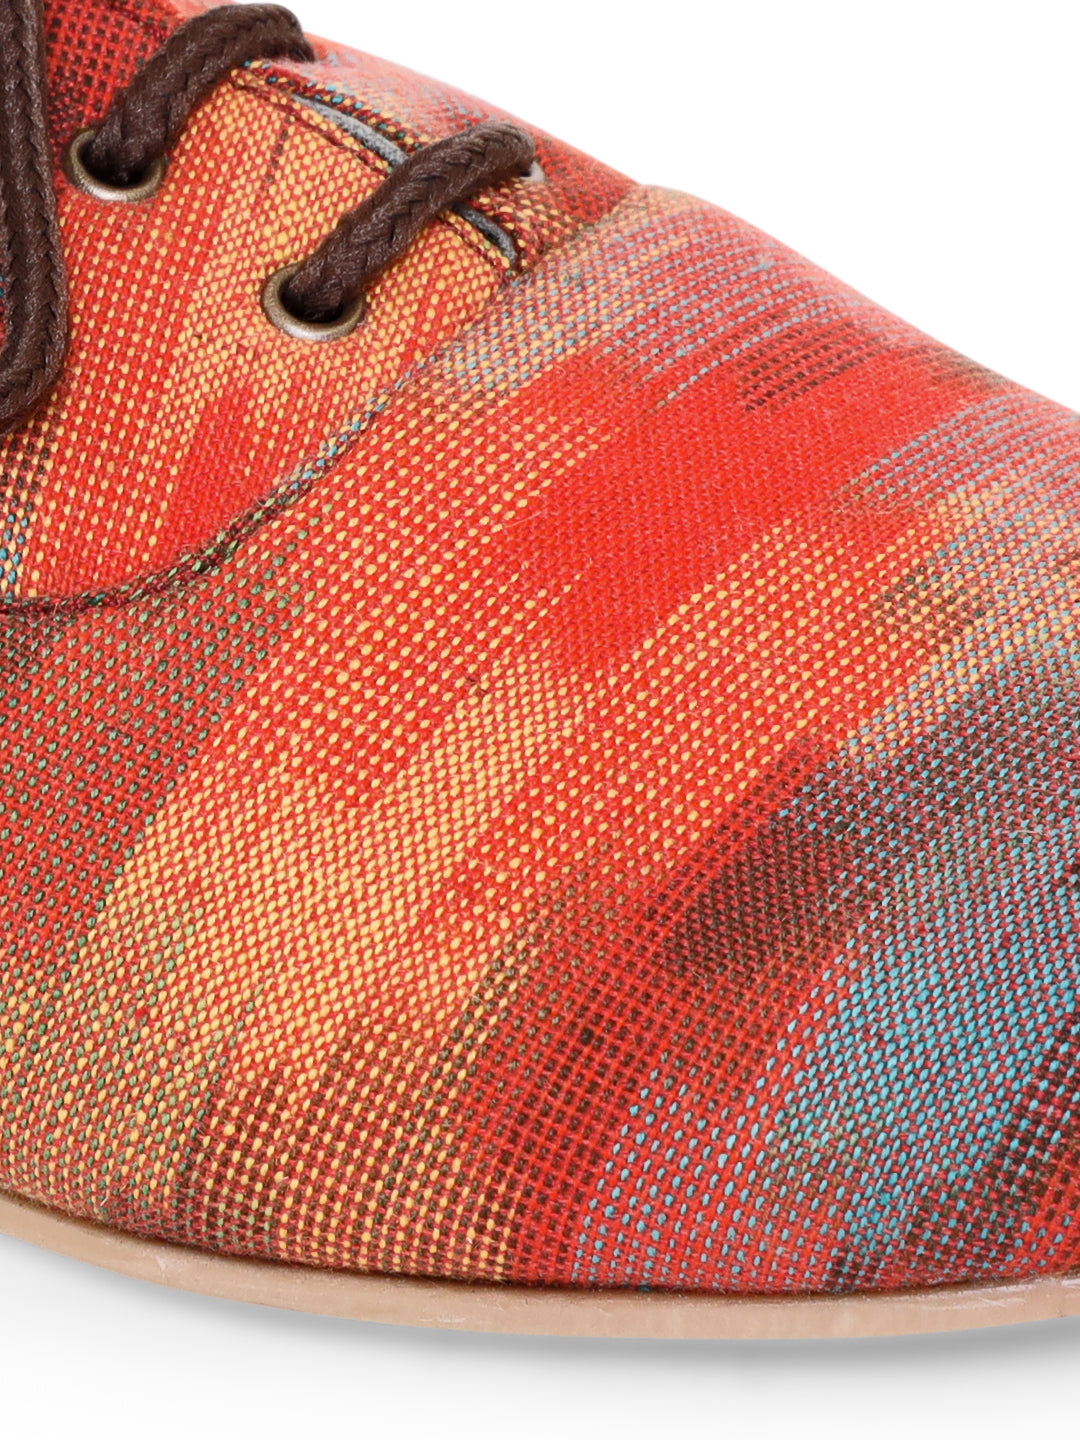 Colourful Traditional Weave Oxfords